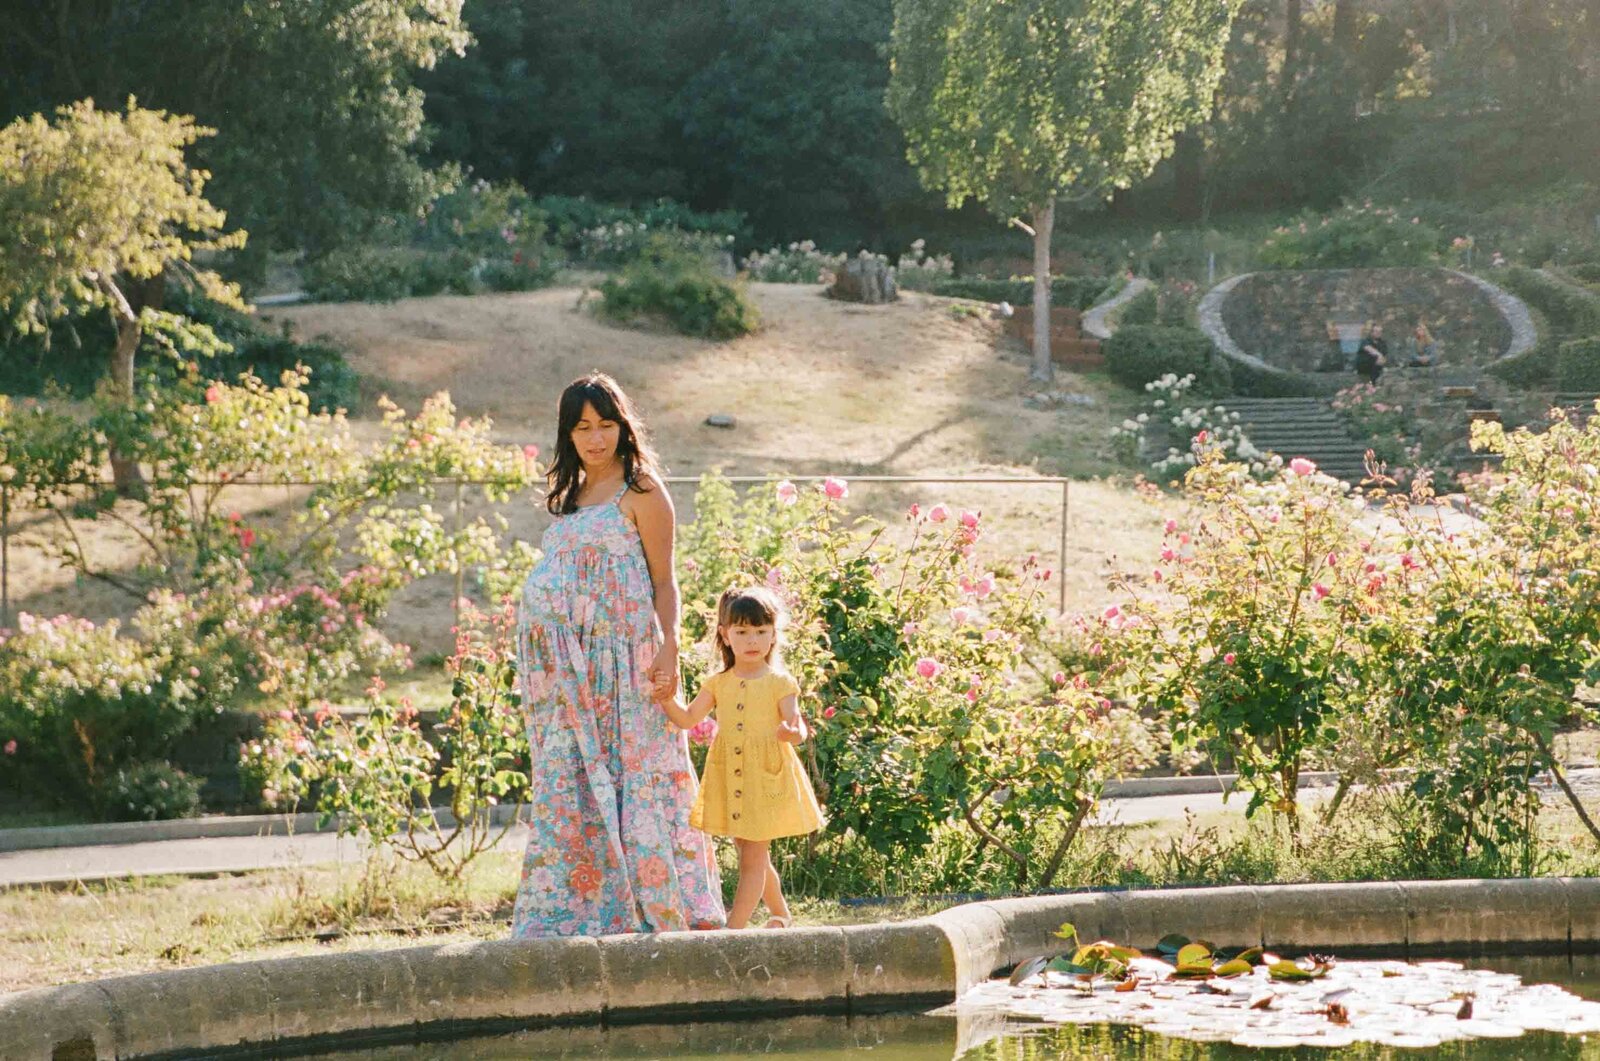 film photo of pregnant woman in a free people maxi dress holding hands with toddler daughter in yellow dress and walking in an oakland california rose garden